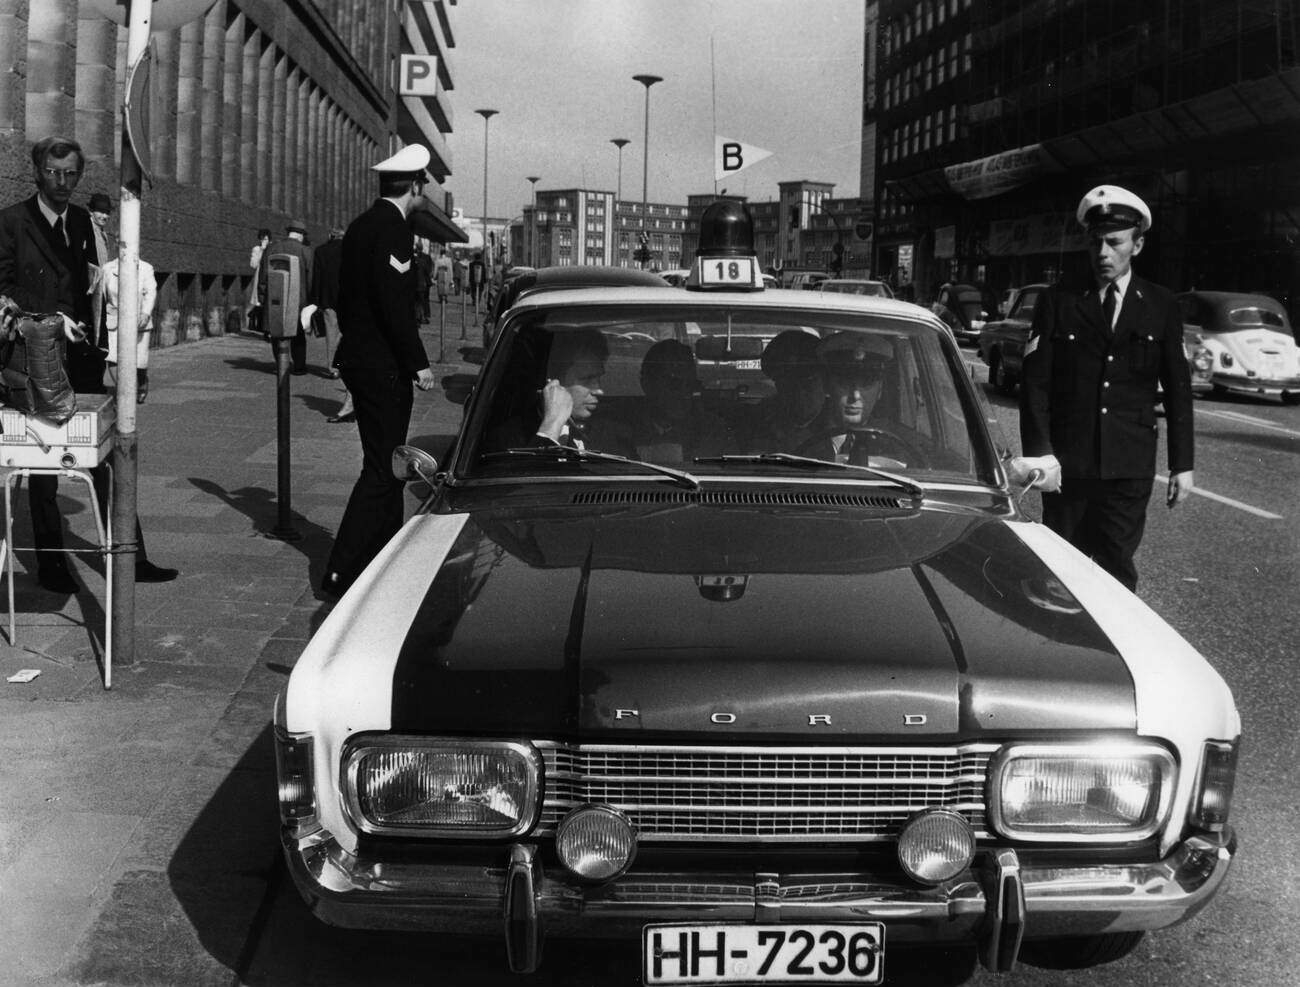 Police patrol car in front of the finance office in Hamburg, Germany after a robbery on April 21, 1971.